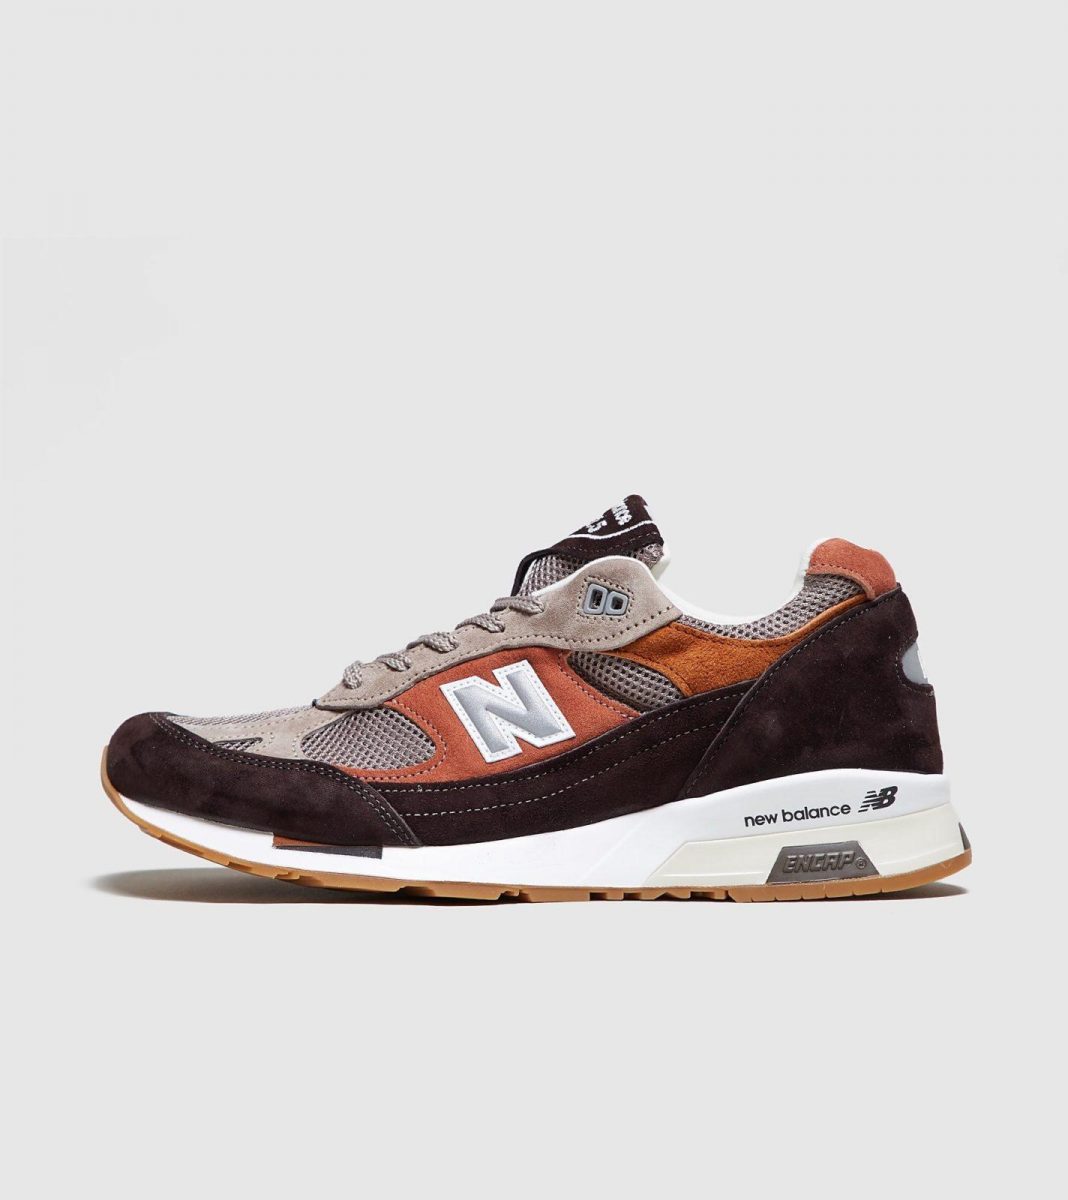 New Balance 991.5 - Made in England 